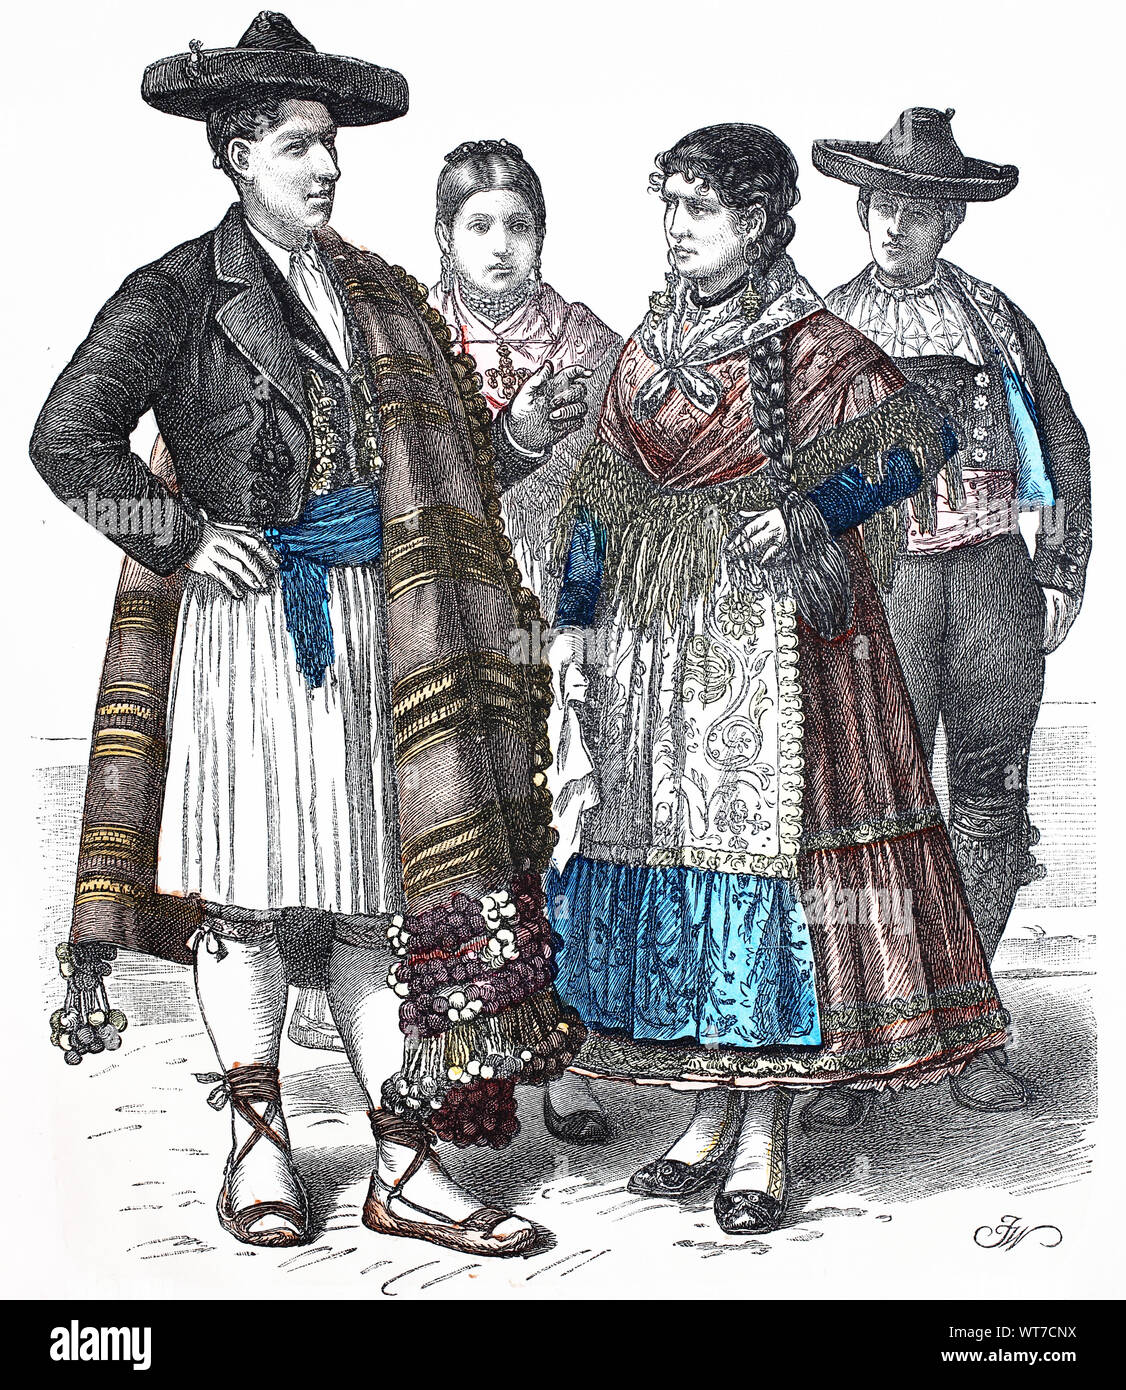 Spain clothing tradition dress Cut Out Stock Images & Pictures - Alamy